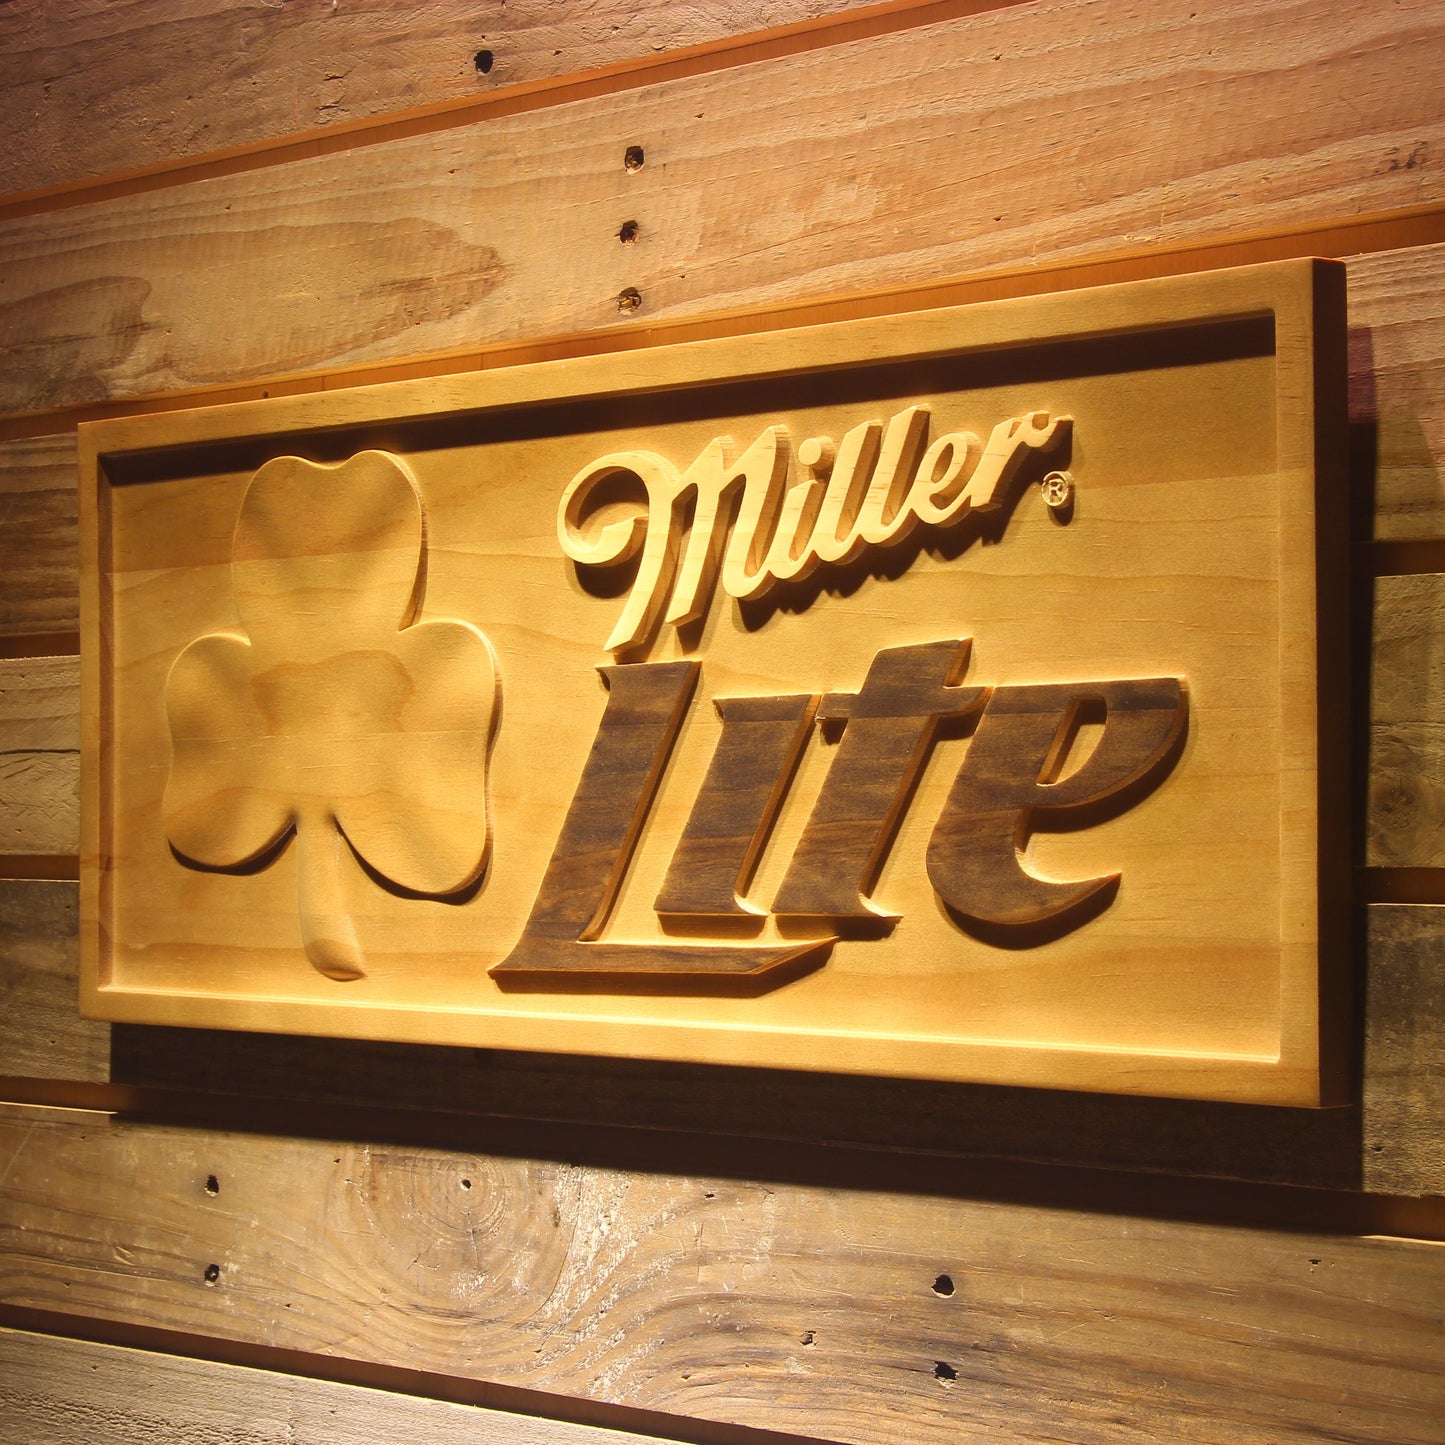 Miller Light Shamrock  3D Wooden Bar Signs by Woody Signs Co. - Handmade Crafted Unique Wooden Creative